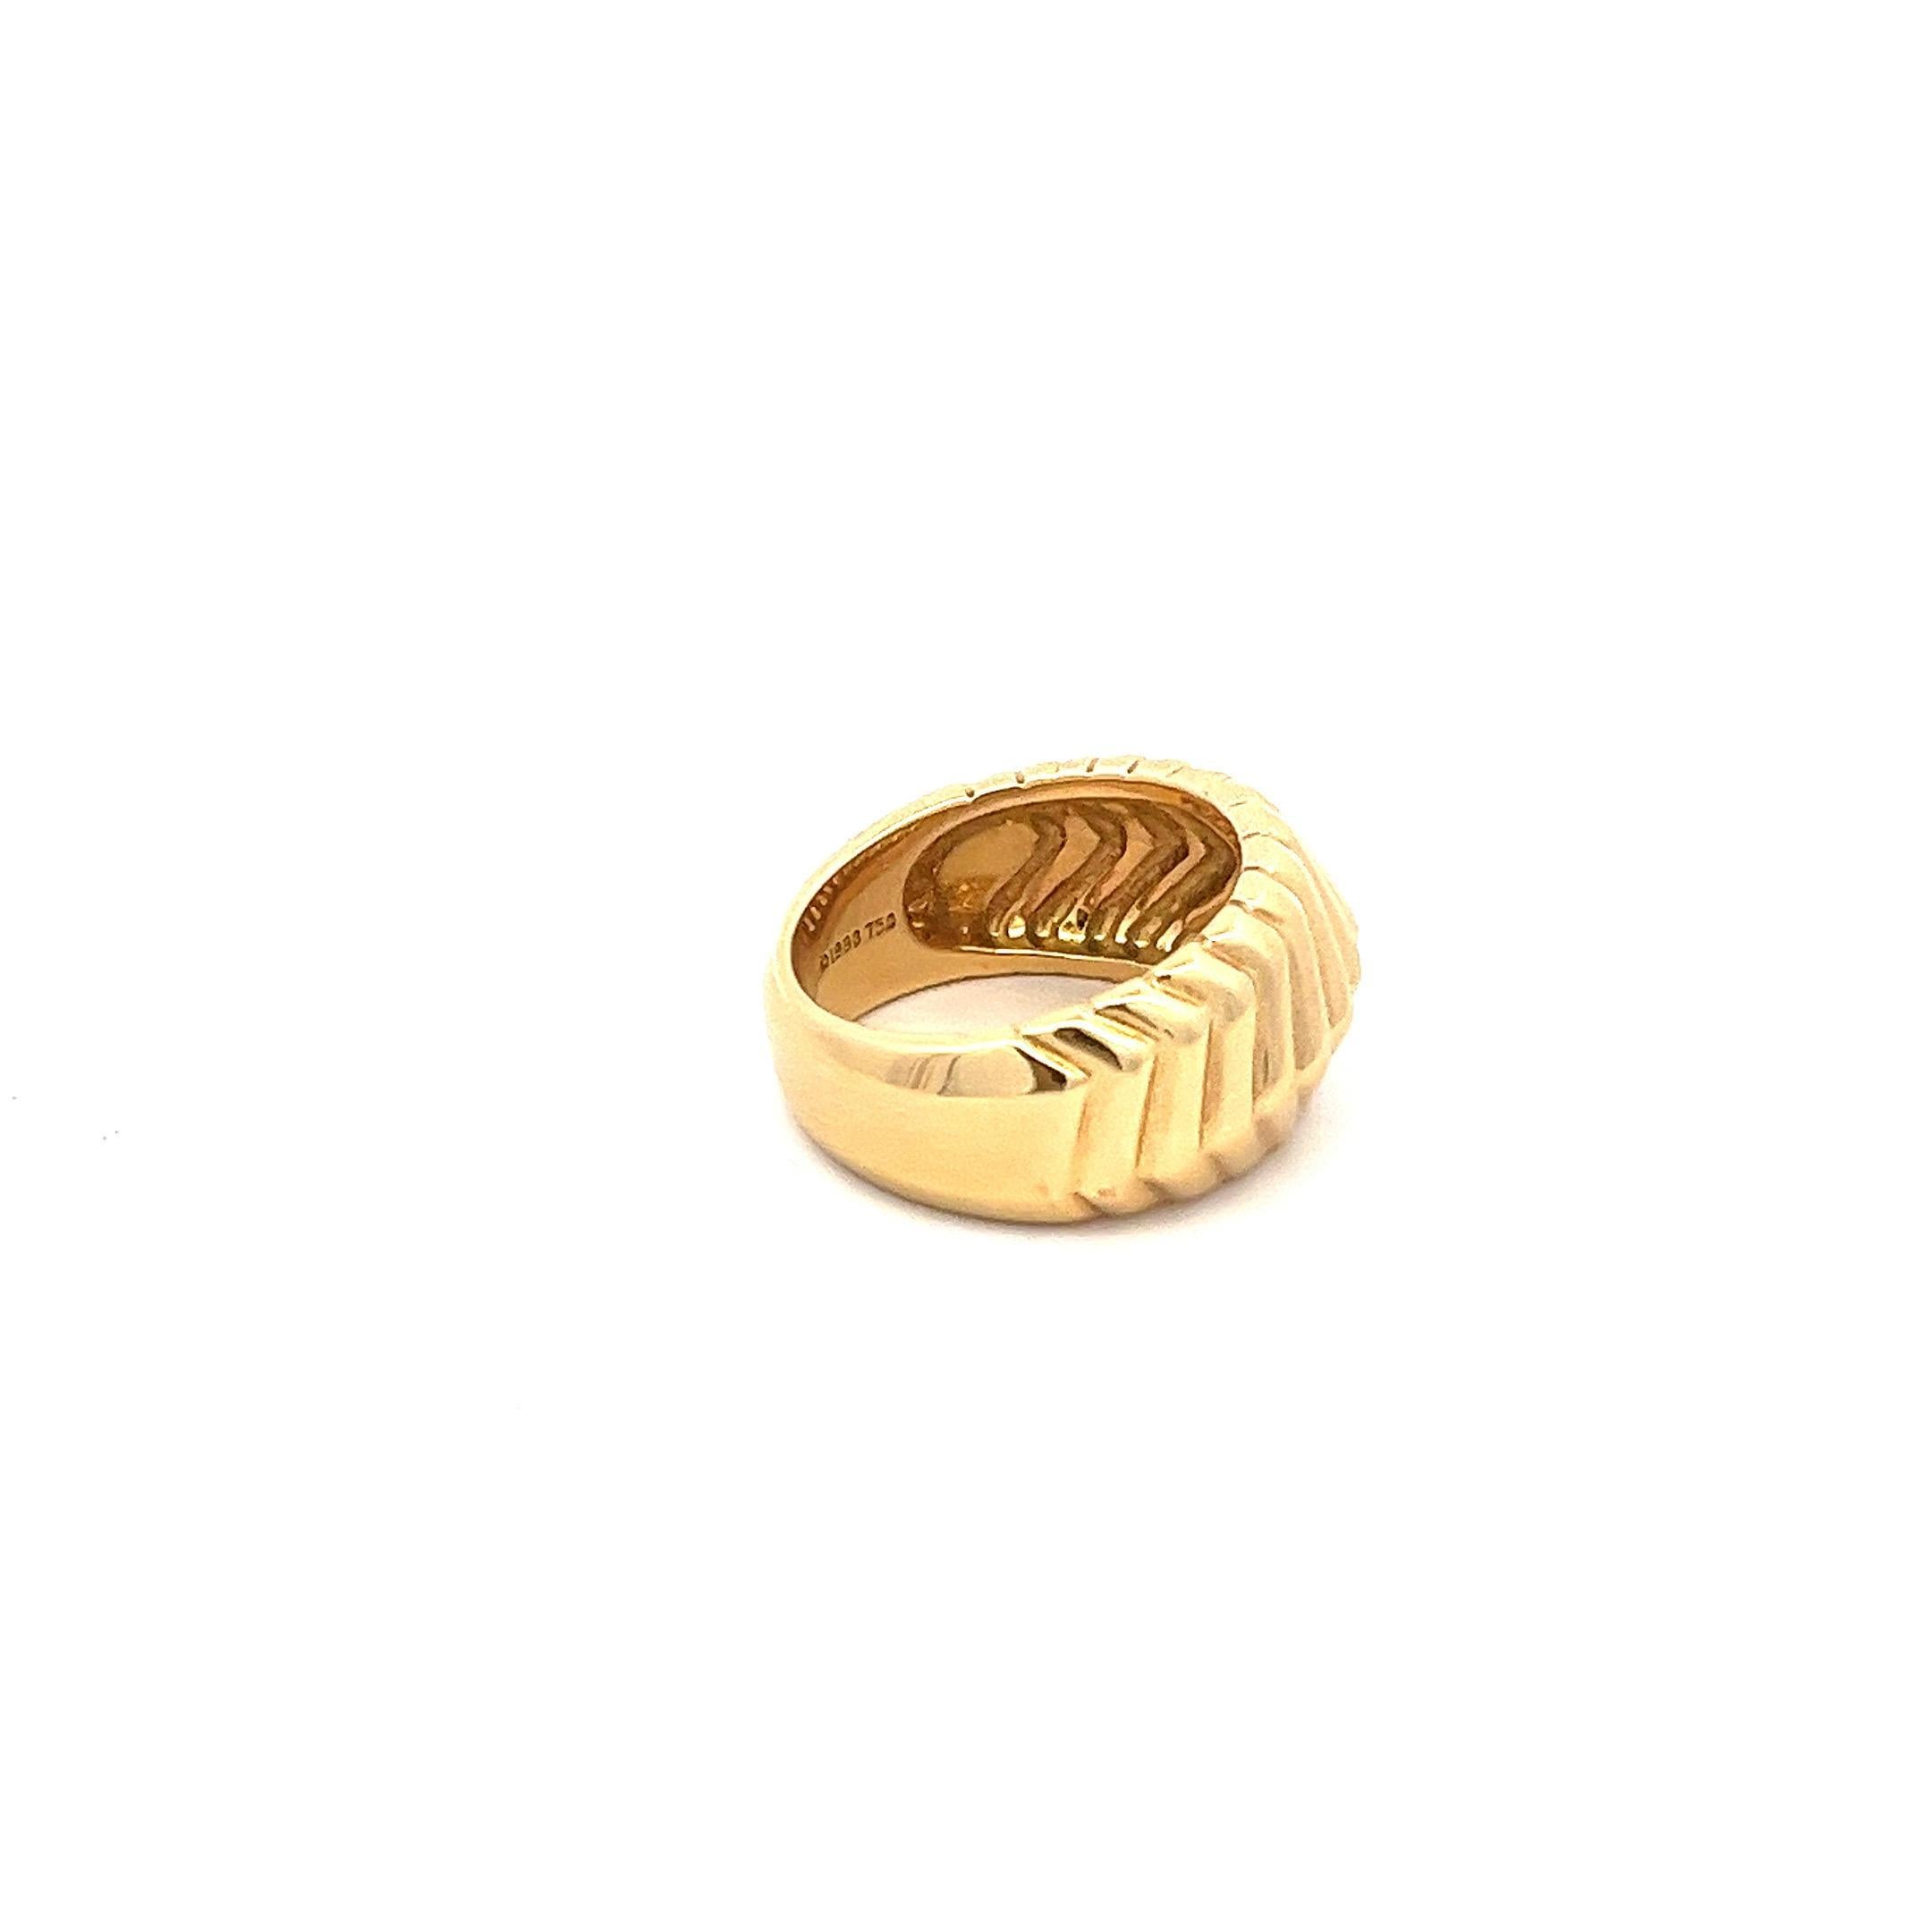 The Tiffany & Co. Cordis ring, made with  18 karat yellow gold, stands as an emblem of classic style. It is highlighted by a prominent chevron band pattern, which is often associated with protection and serves as a hallmark of Tiffany's iconic